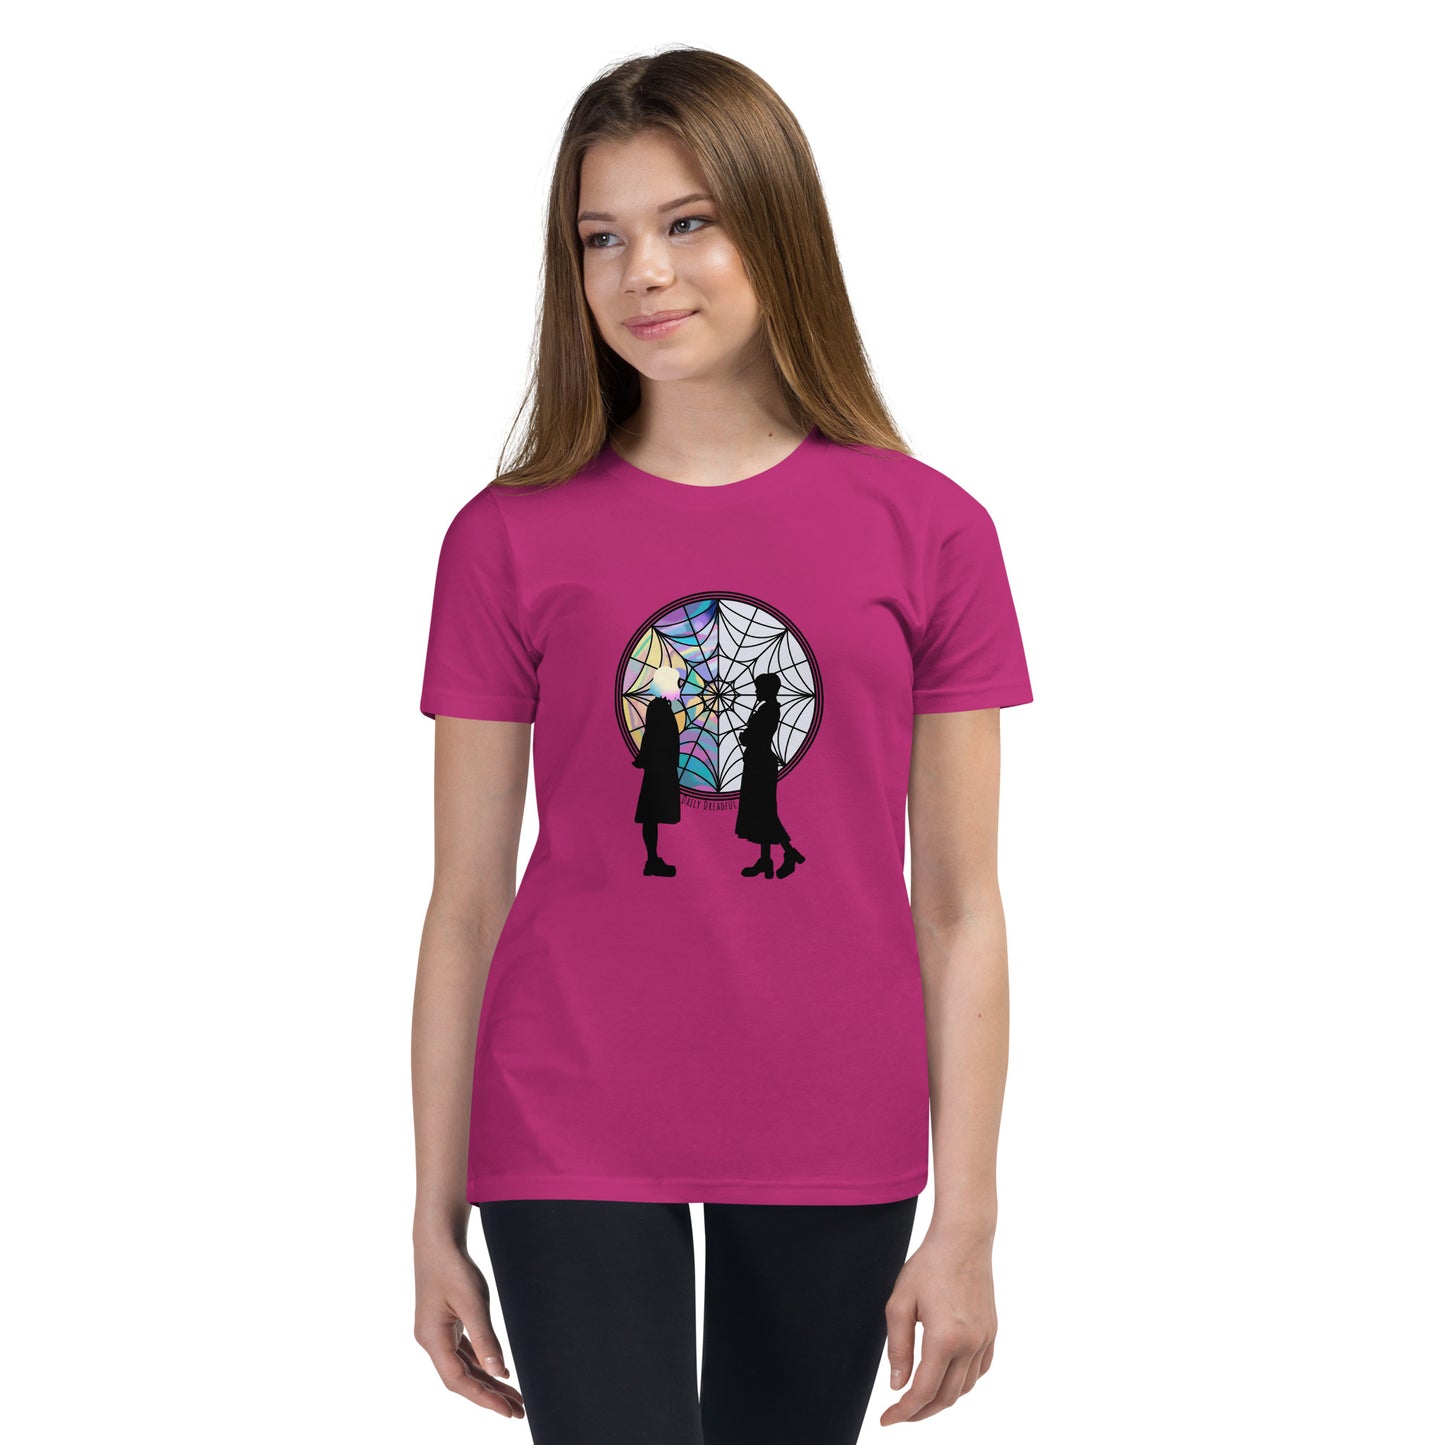 berry "Wednesday Addams and Enid" Youth Short Sleeve T-Shirt from Daily Dreadful